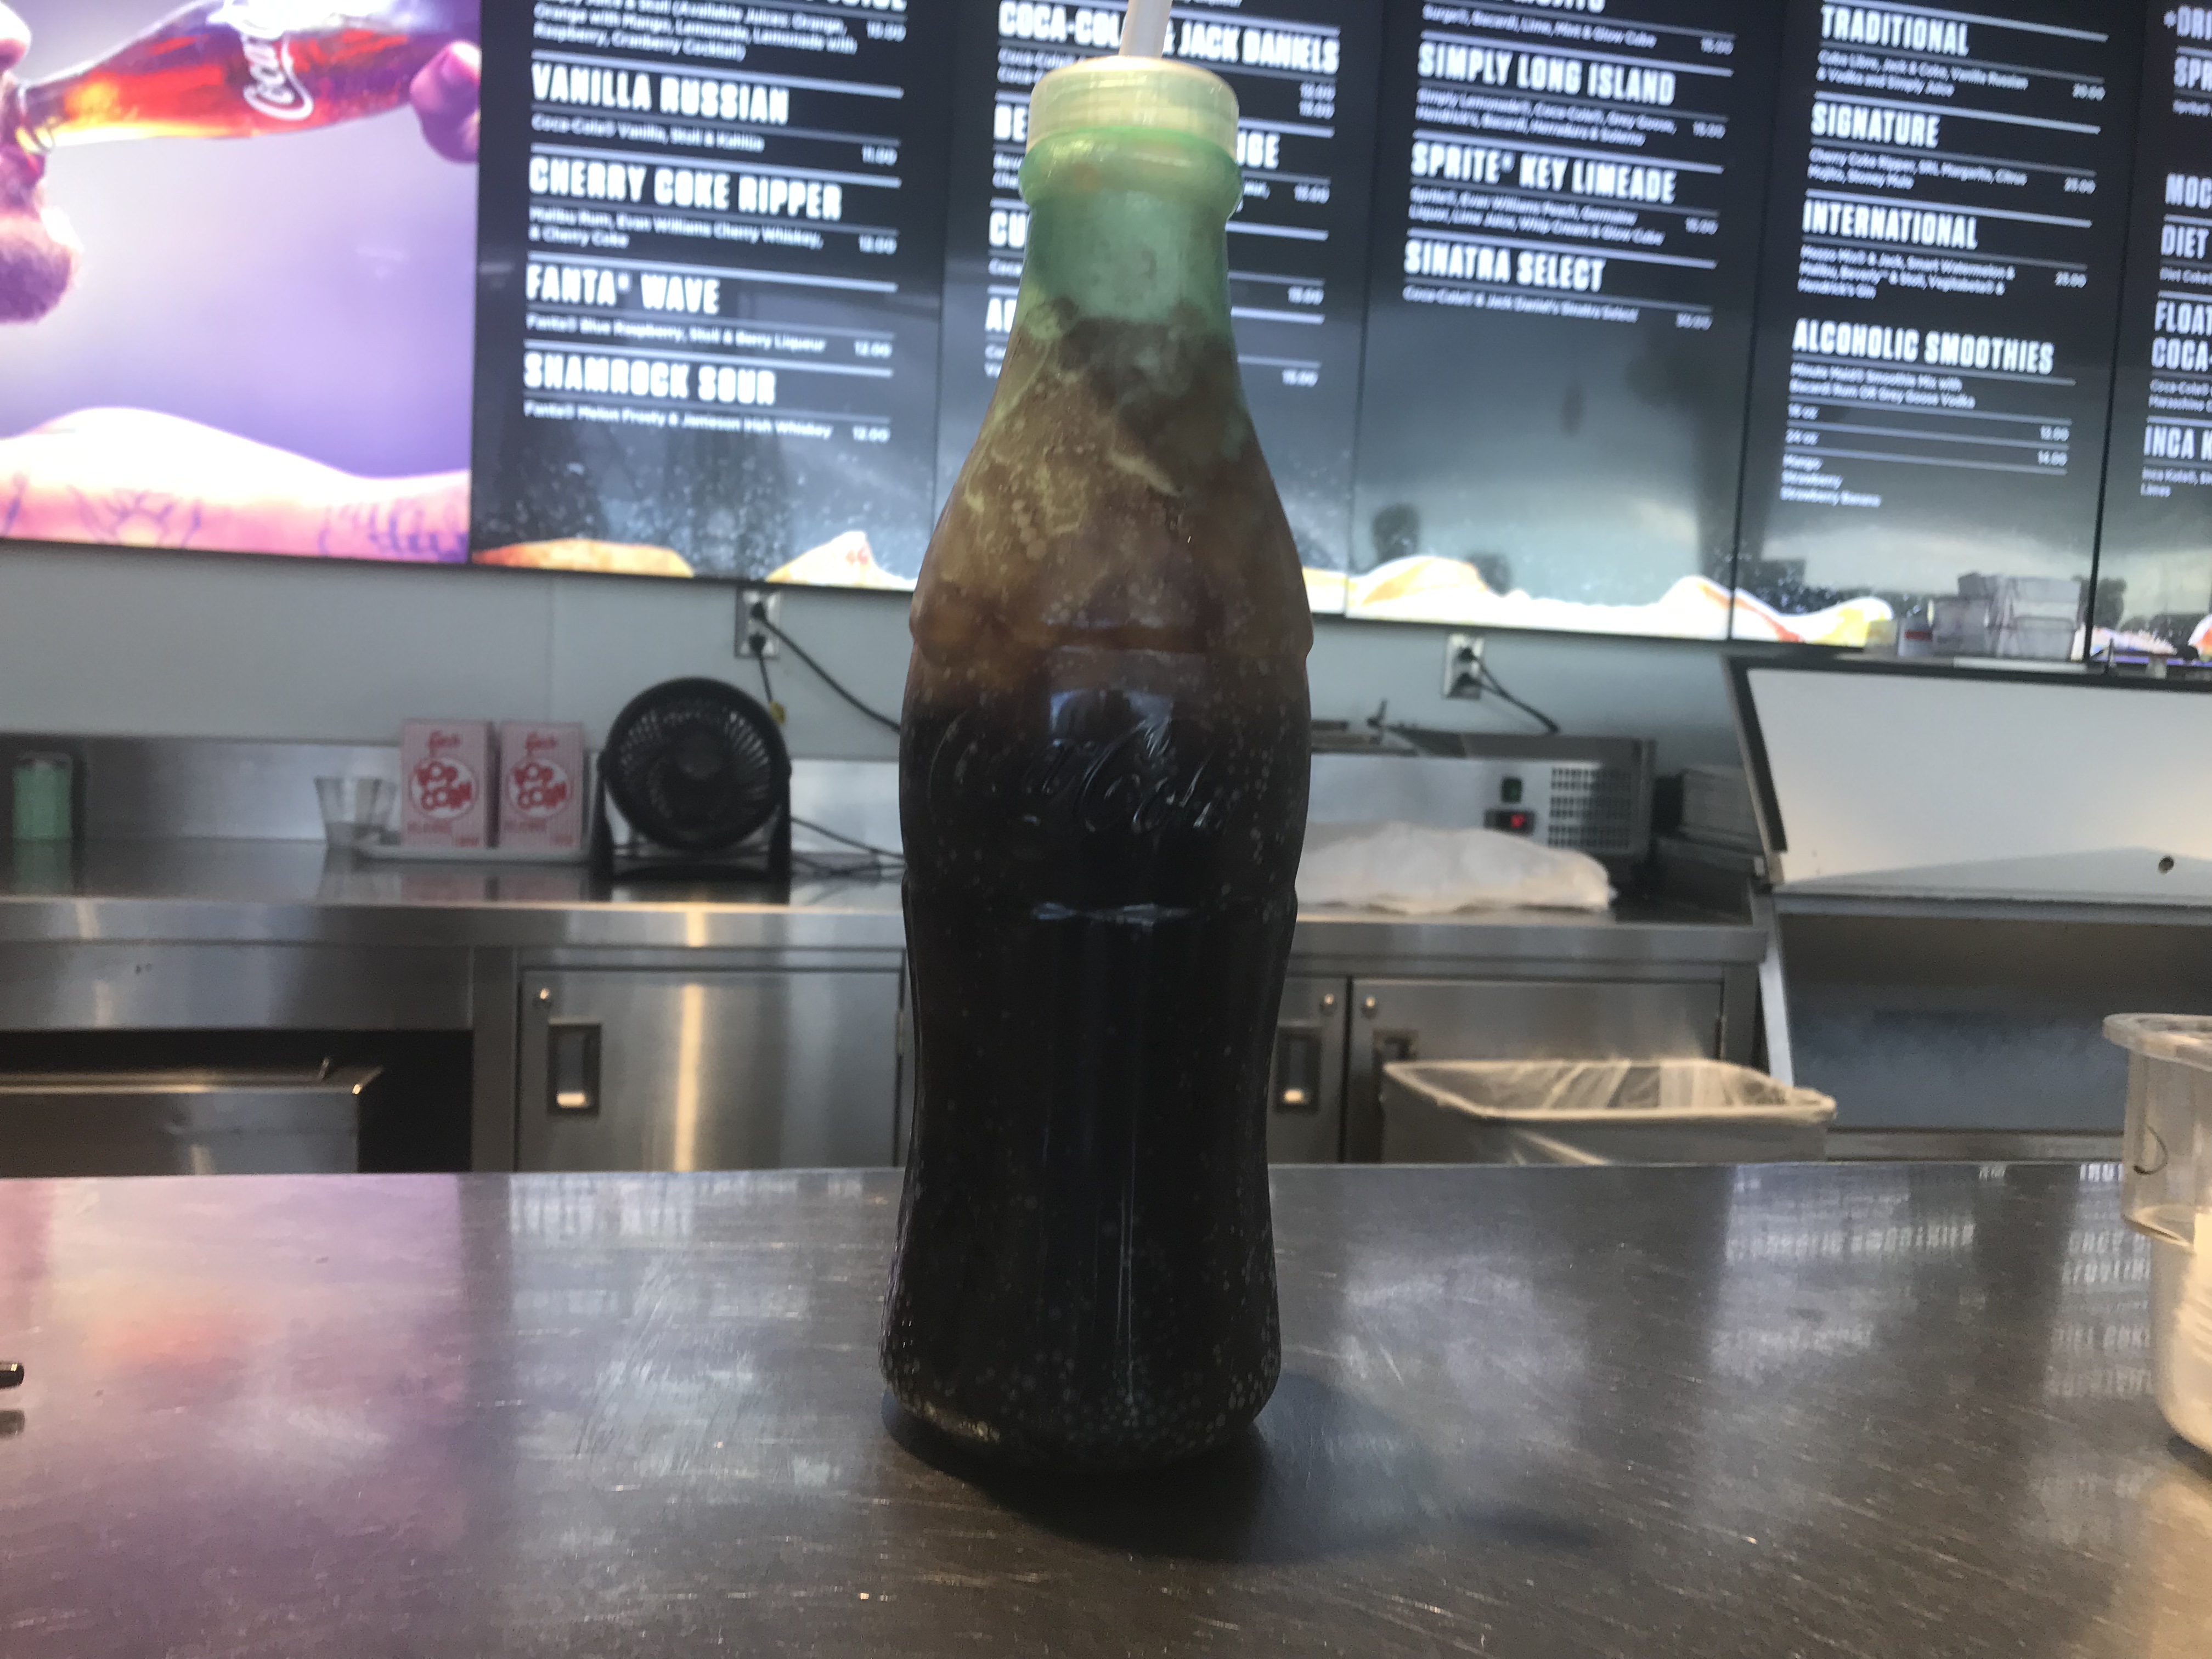 New Dollar Refills At The Coca-Cola Store In Disney Springs